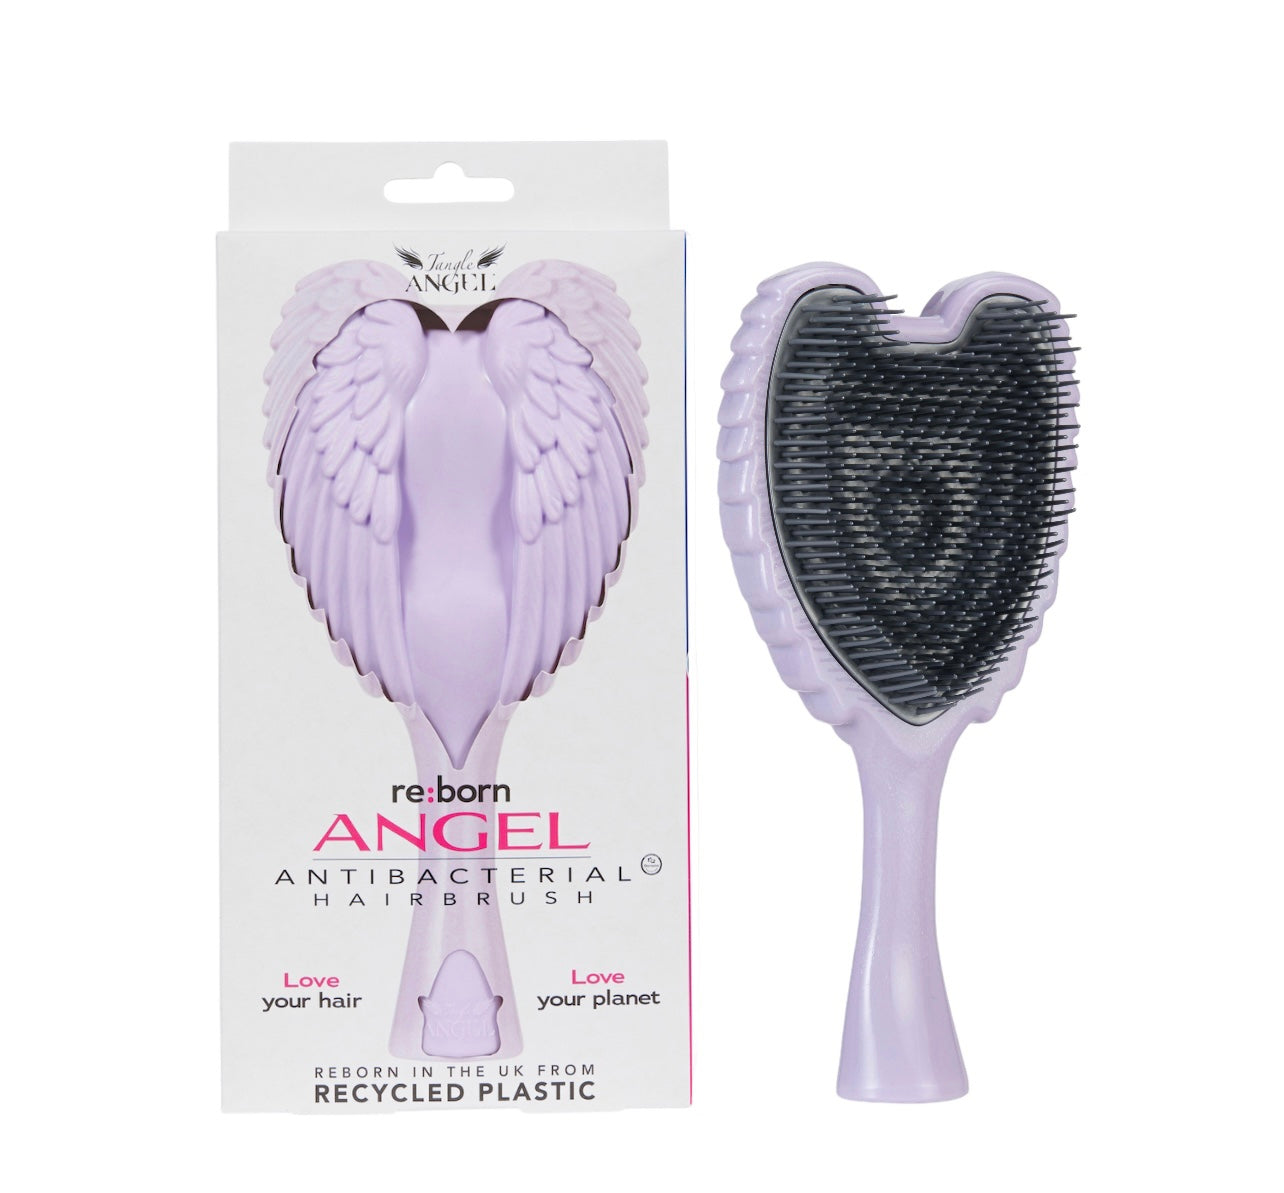 Tangle Angel RE:BORN Lilac reborn in the UK from recycled plastic, antibacterial hairbrush, love your hair, love your planet Phoenix Nationale